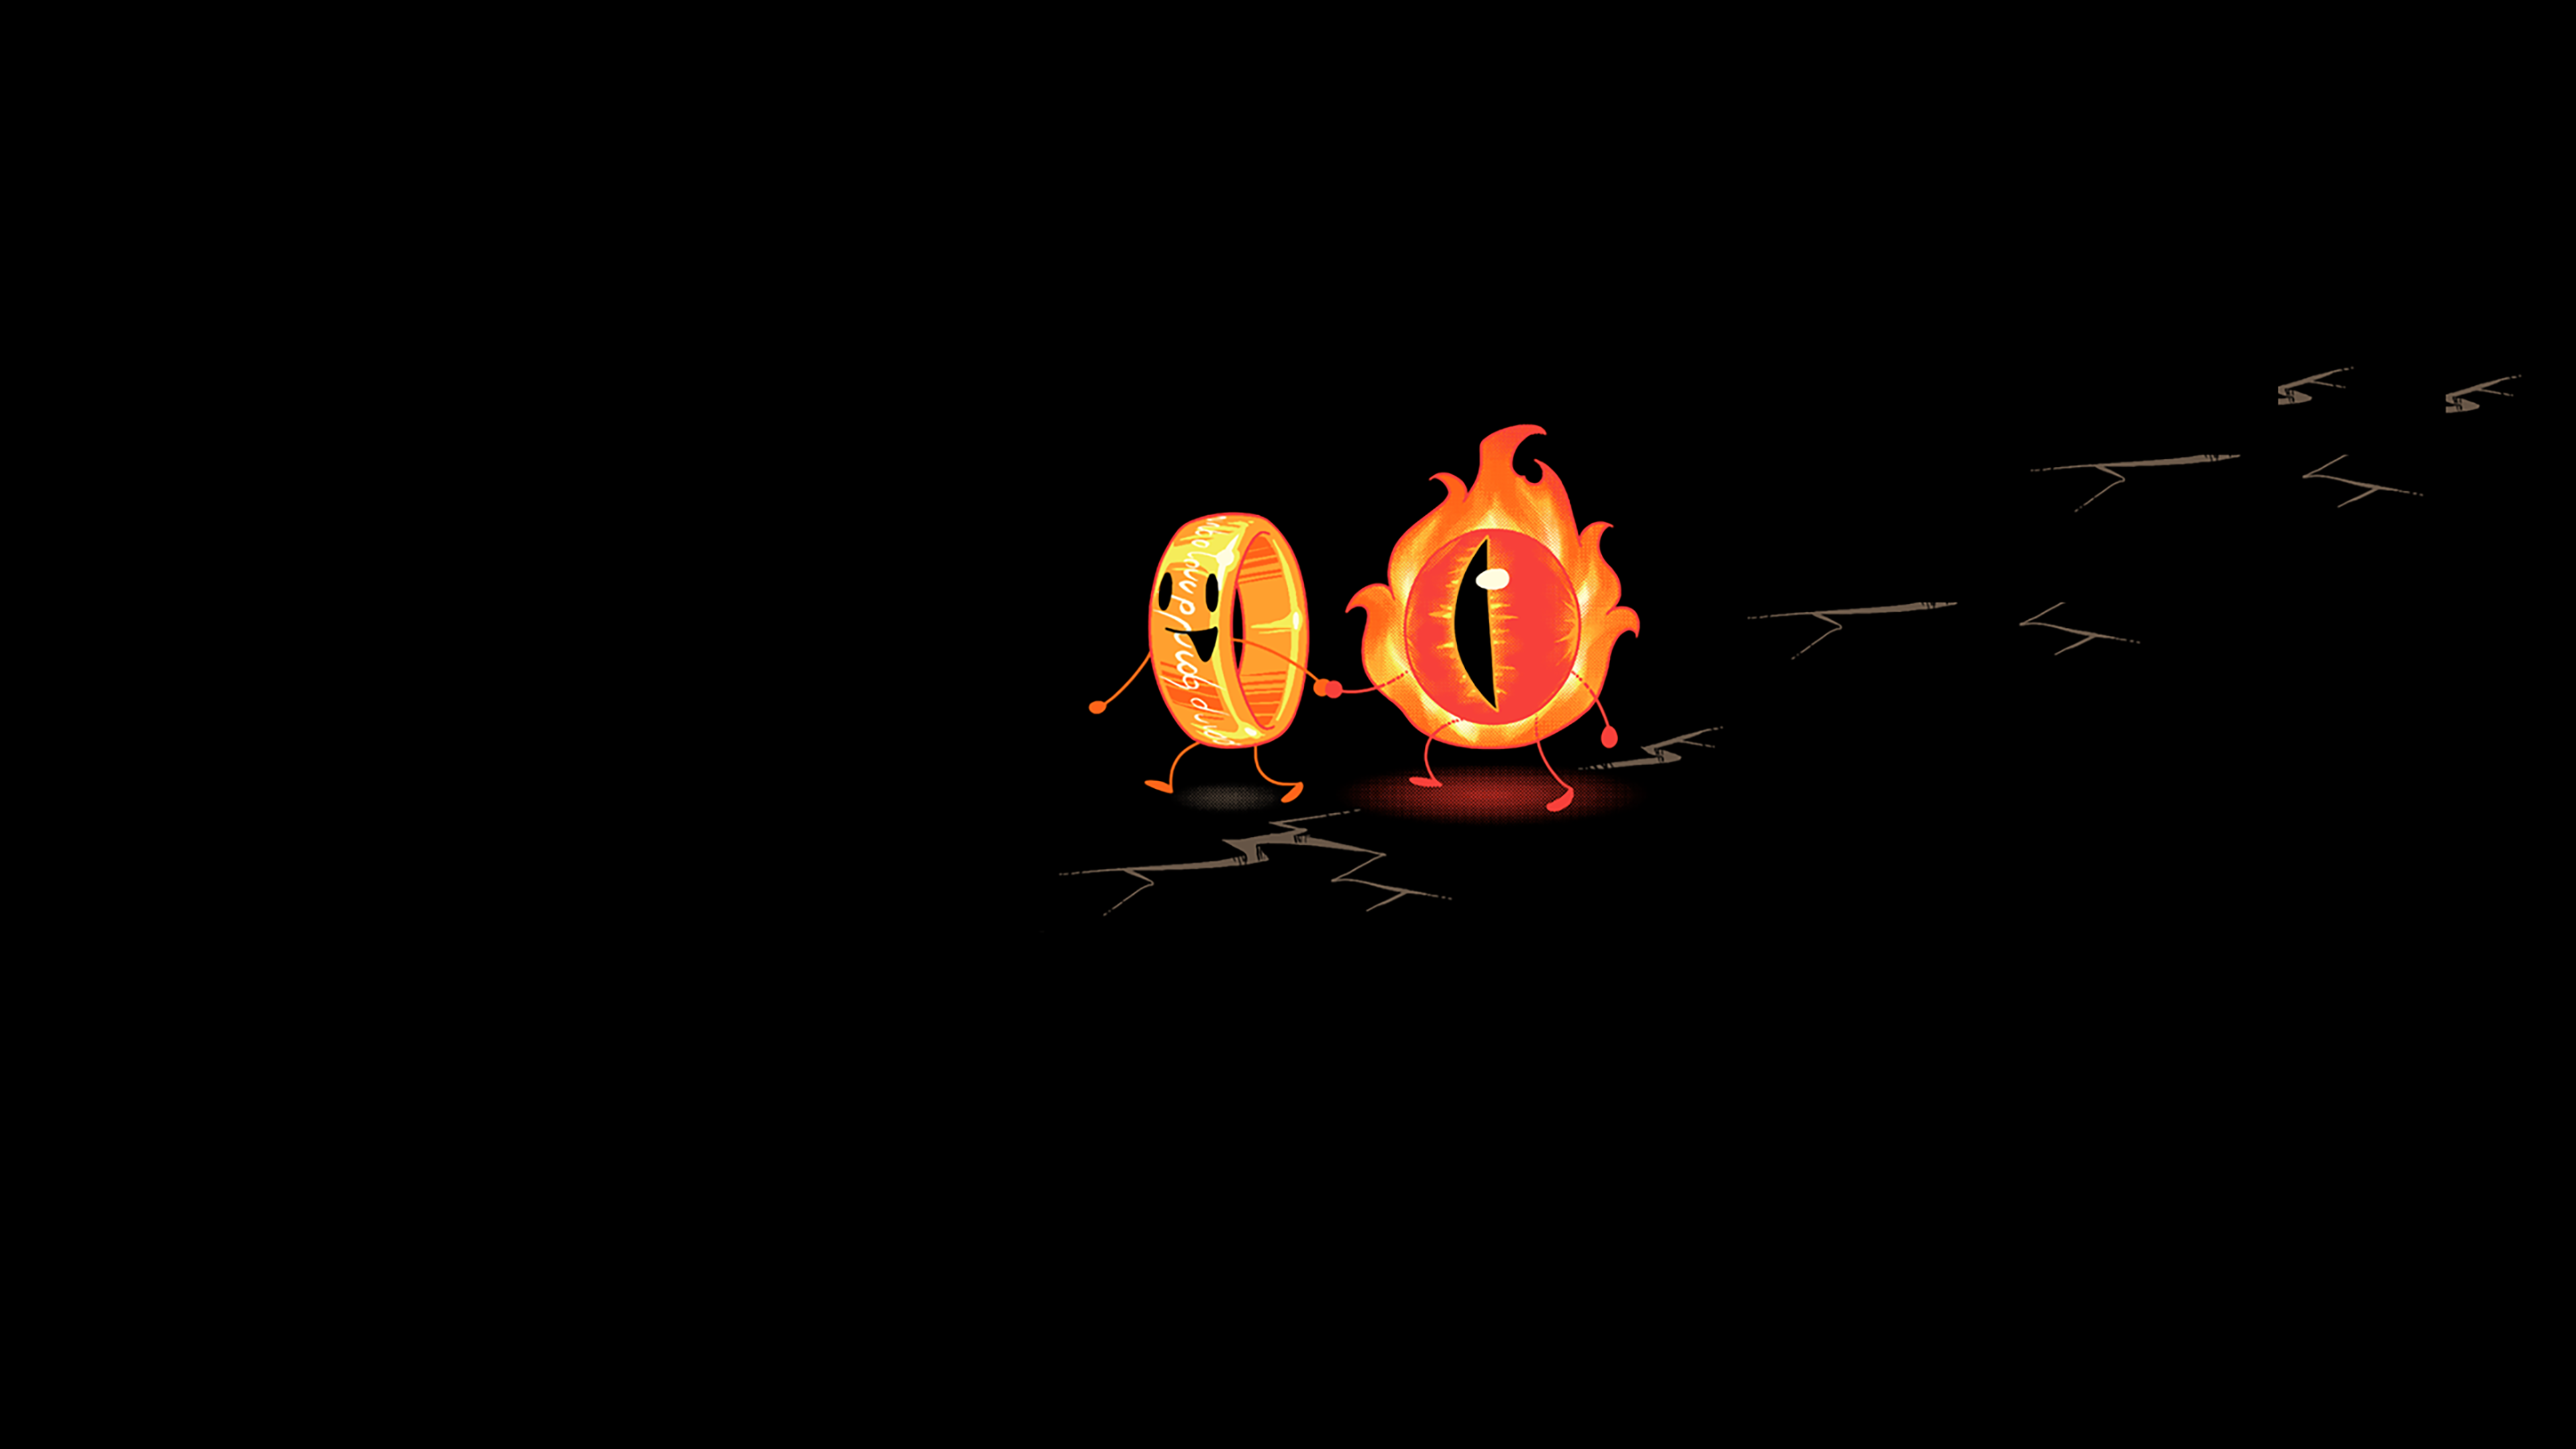 General 3840x2160 The Lord of the Rings Sauron digital art J. R. R. Tolkien humor simple background rings holding hands eyes fire black background